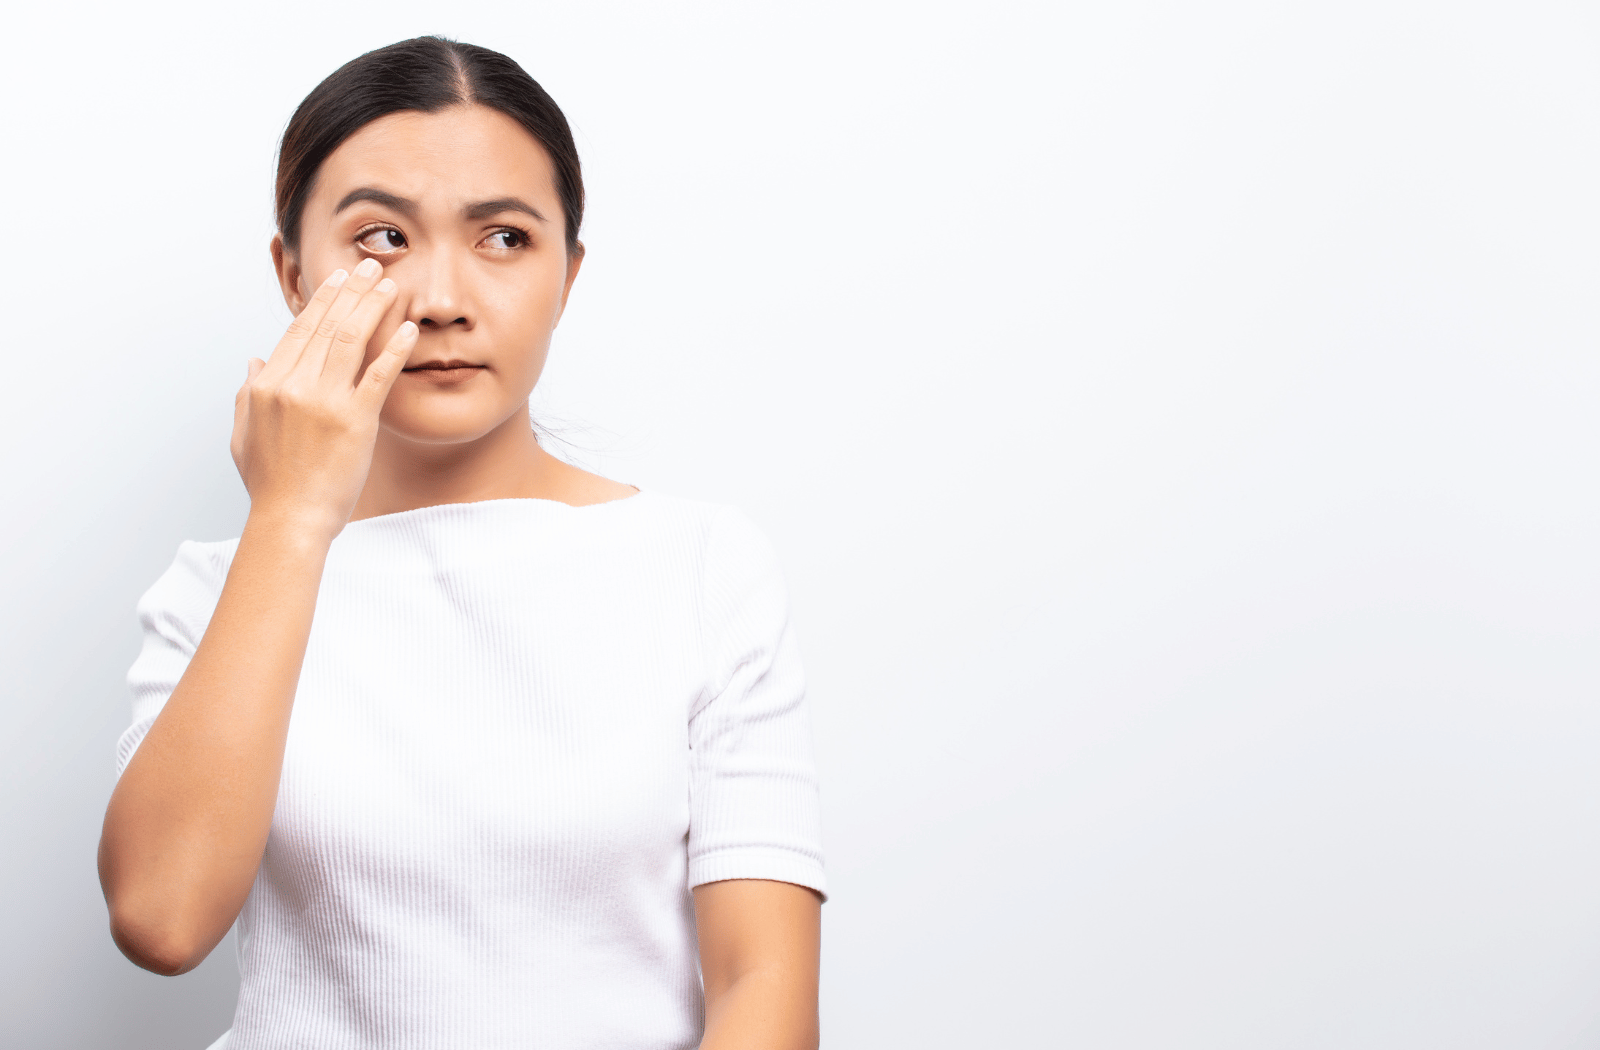 A woman standing against a white background, touching underneath her eye due to eye pain